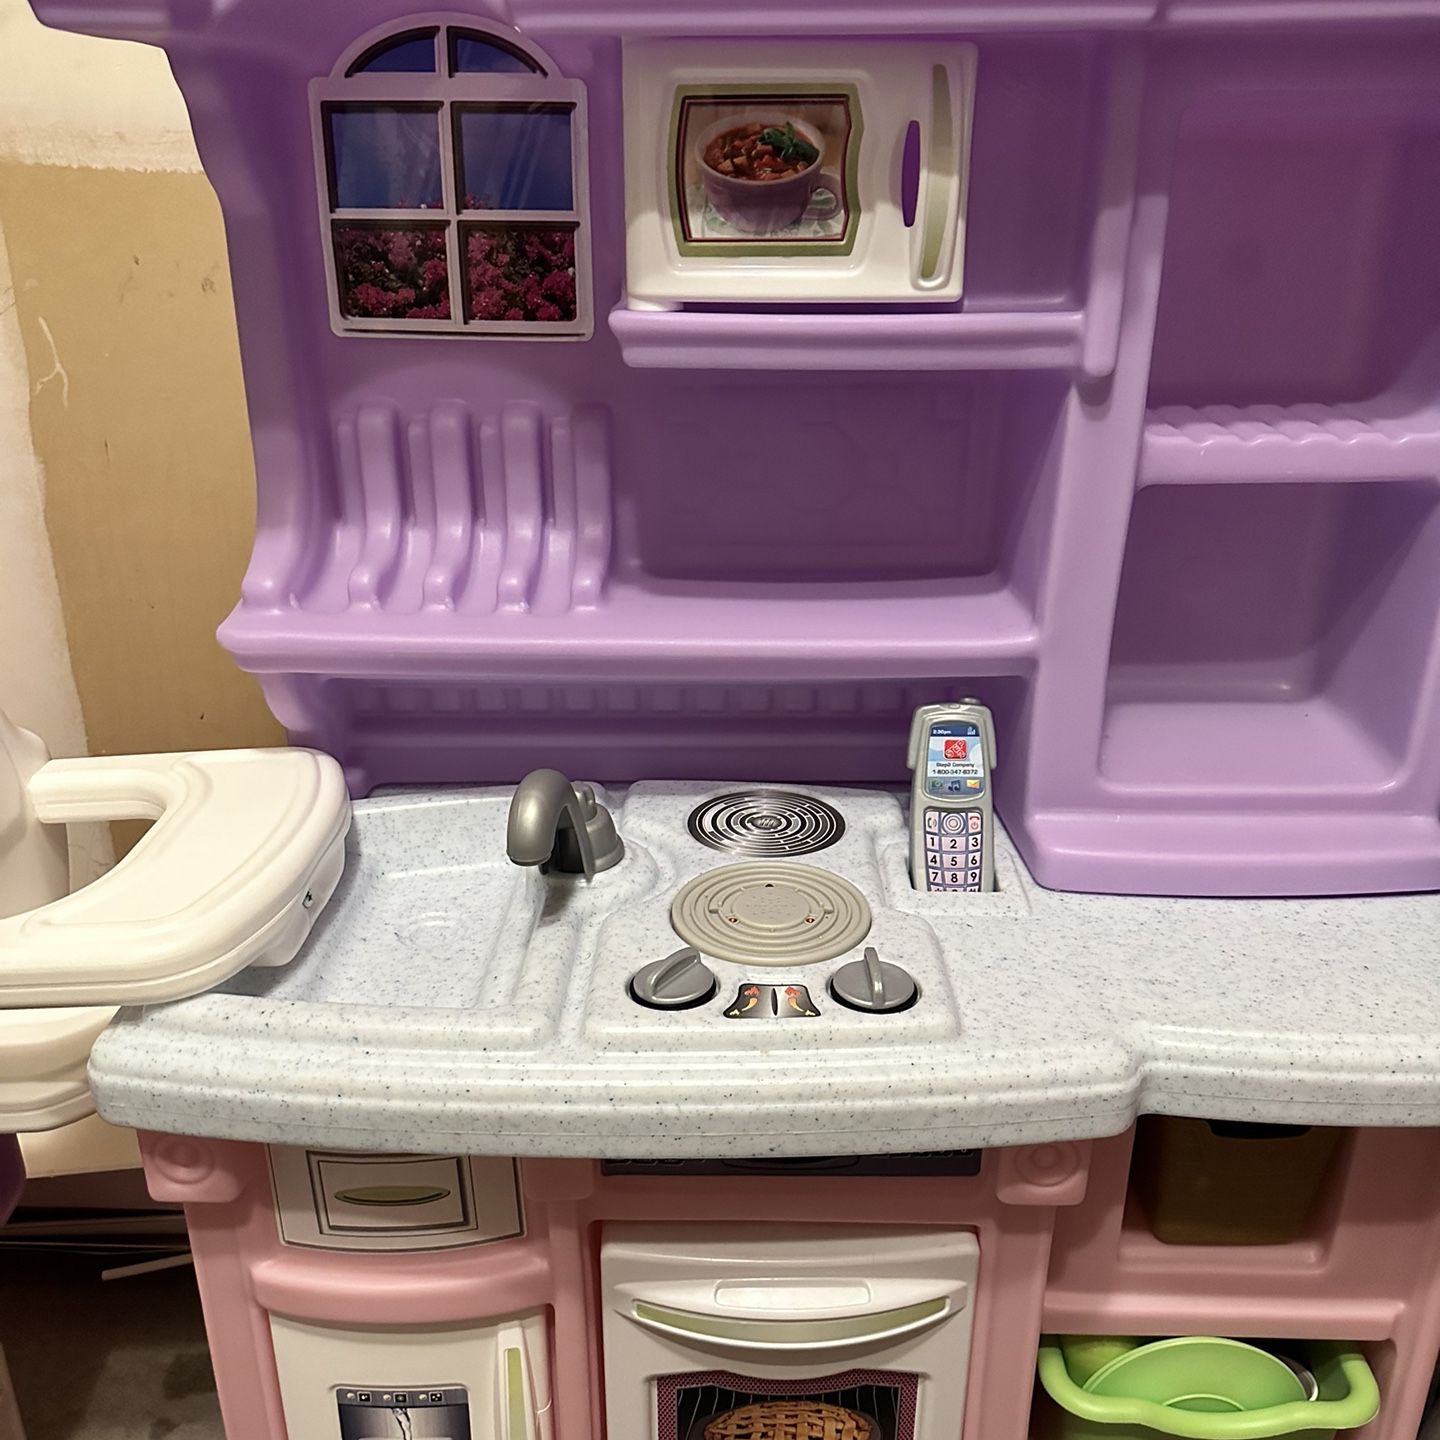 Step2 Pink and Purple Play Kitchen with Kitchen Appliances, dishes